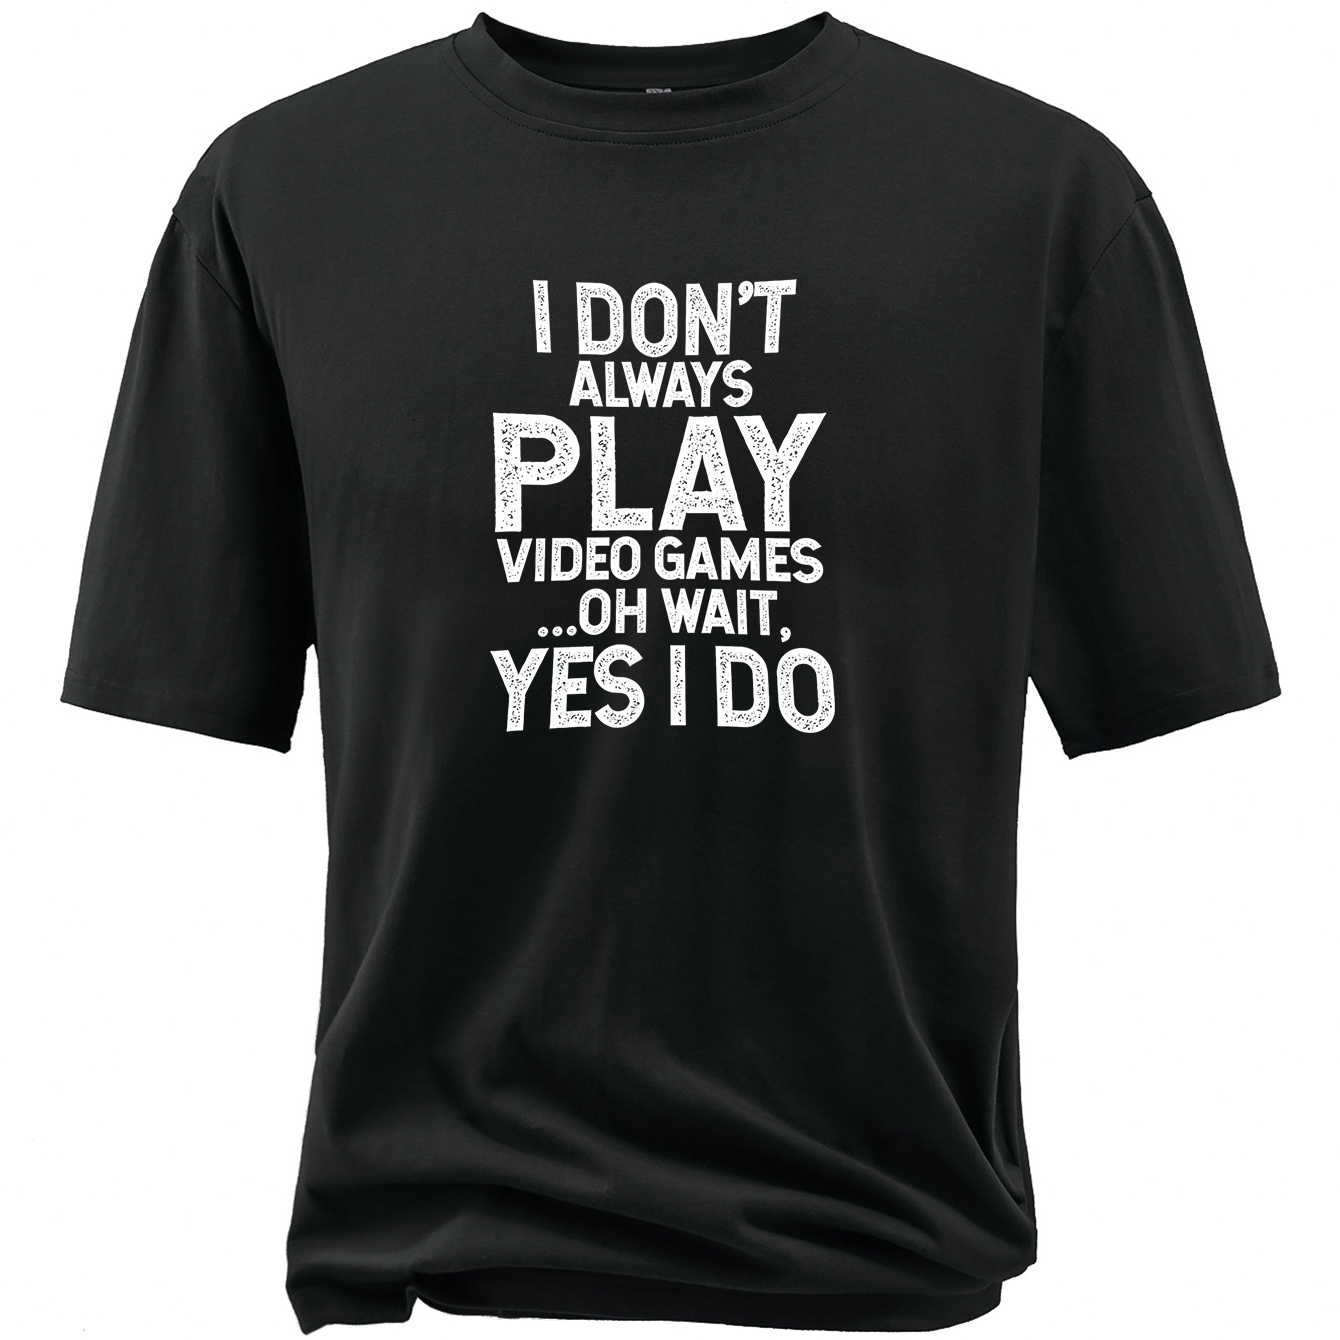 

Plus Size Men's 'i Don't Always Play Video Games, Oh Wait I Do' Funny Letter Print Short Sleeve T-shirts, Comfy Casual Elastic Crew Neck Tops, Men's Clothing